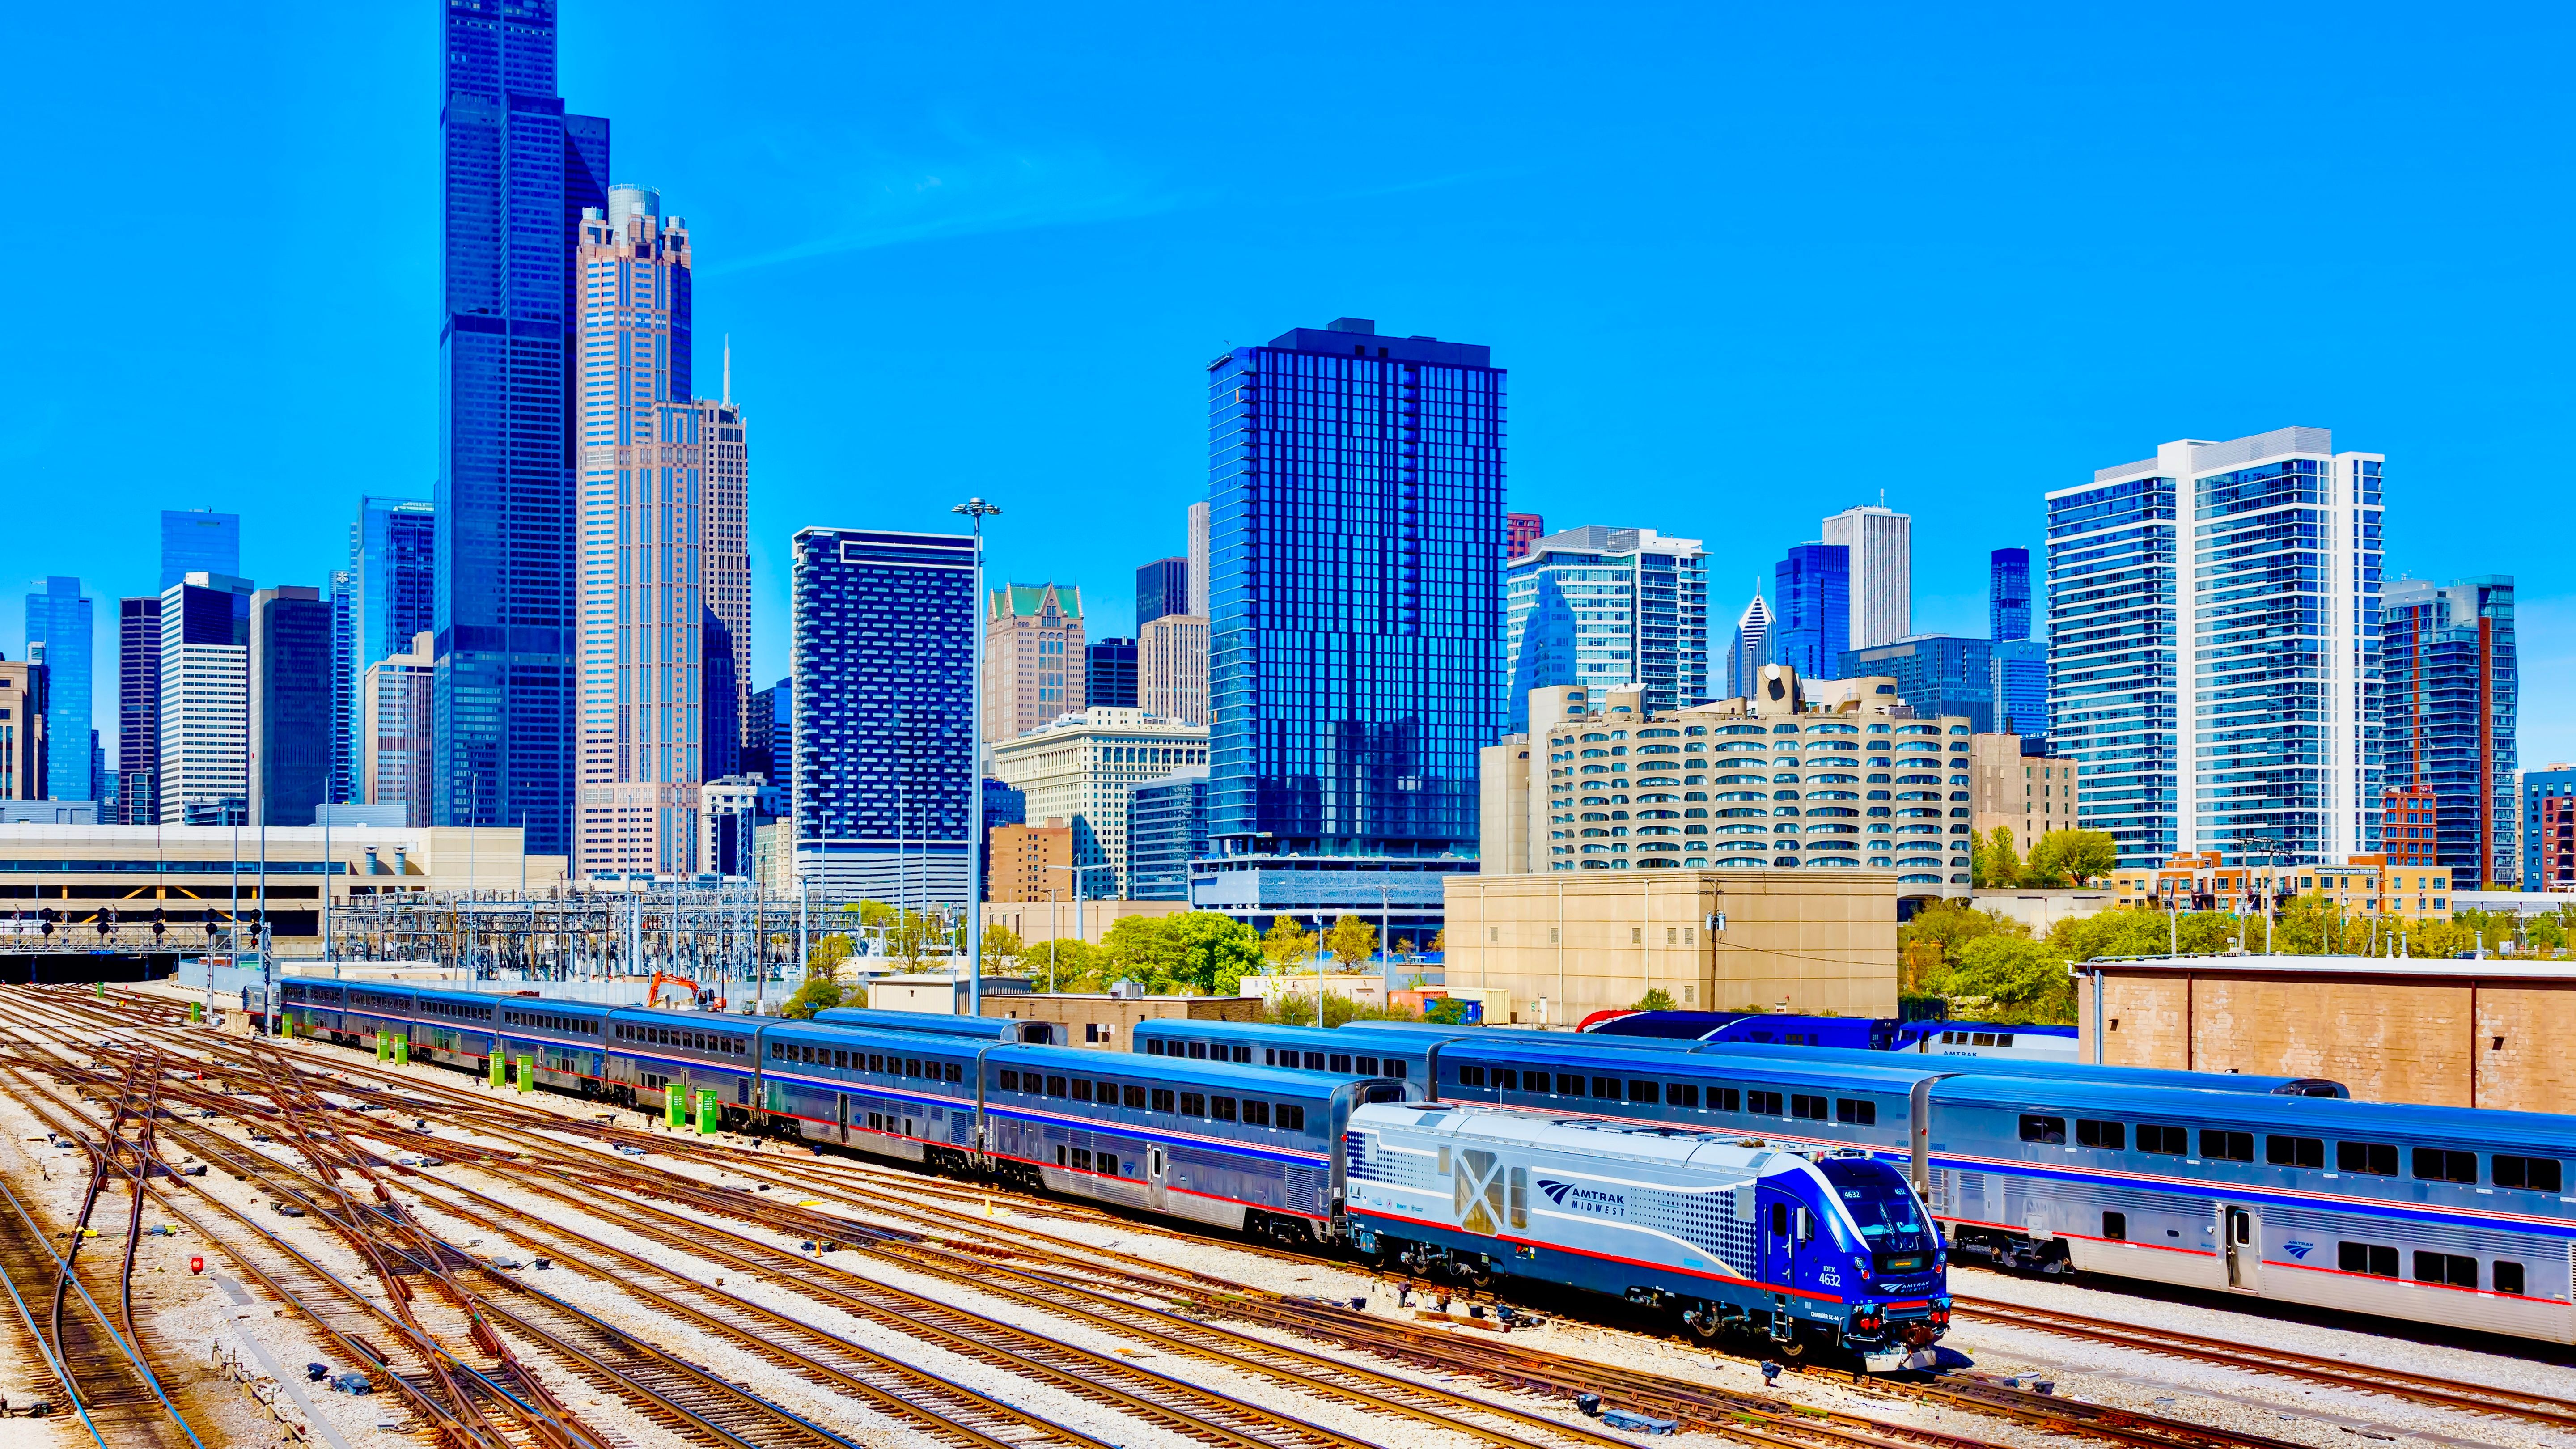 Skyline with Amtrak Midwest passenger train railway near Union Station in Chicago, United States.